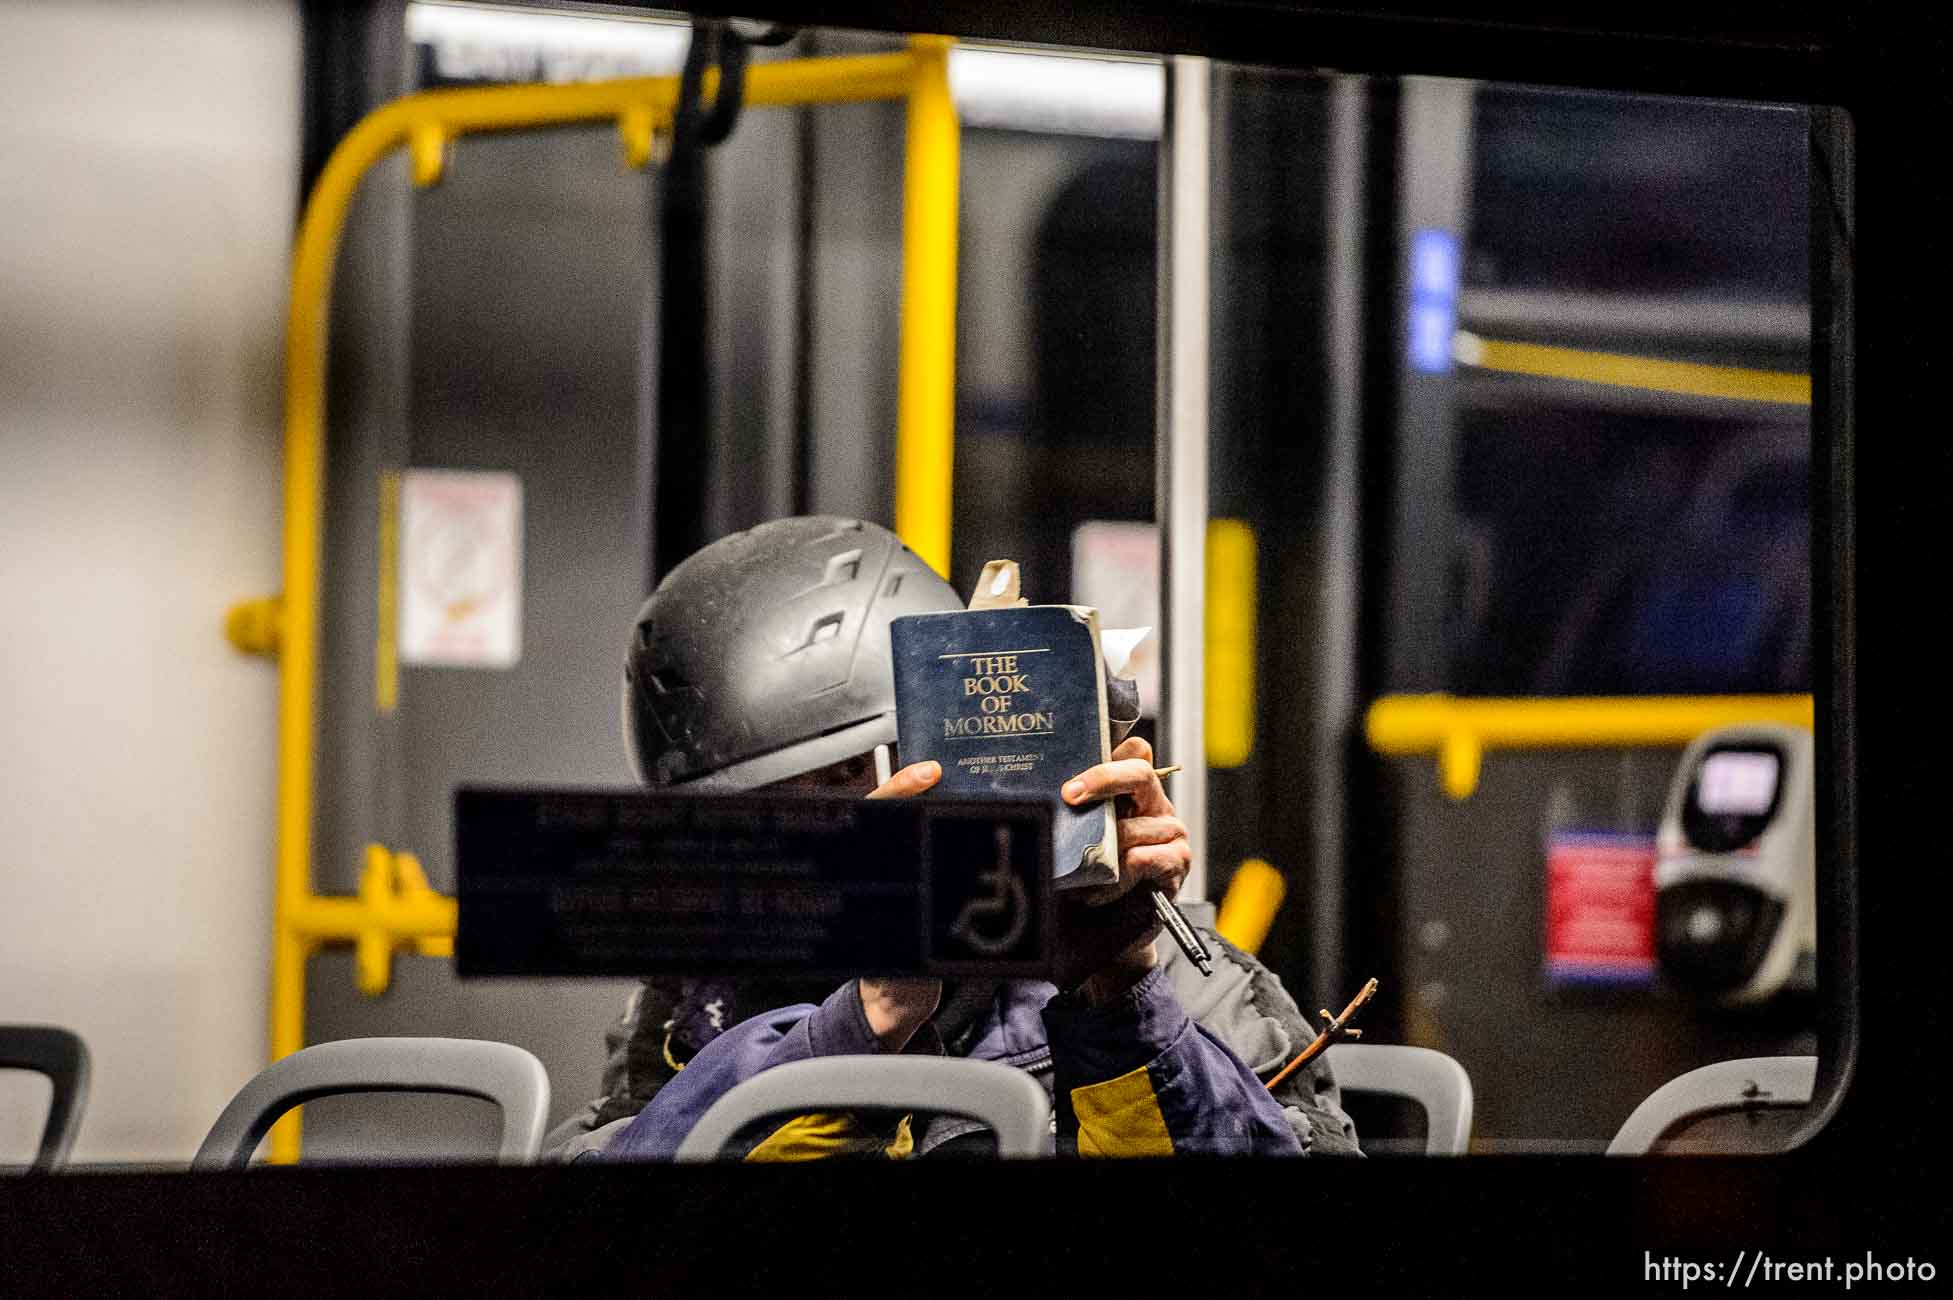 Man wearing a helmet on a bus hiding behind the Book of Mormon